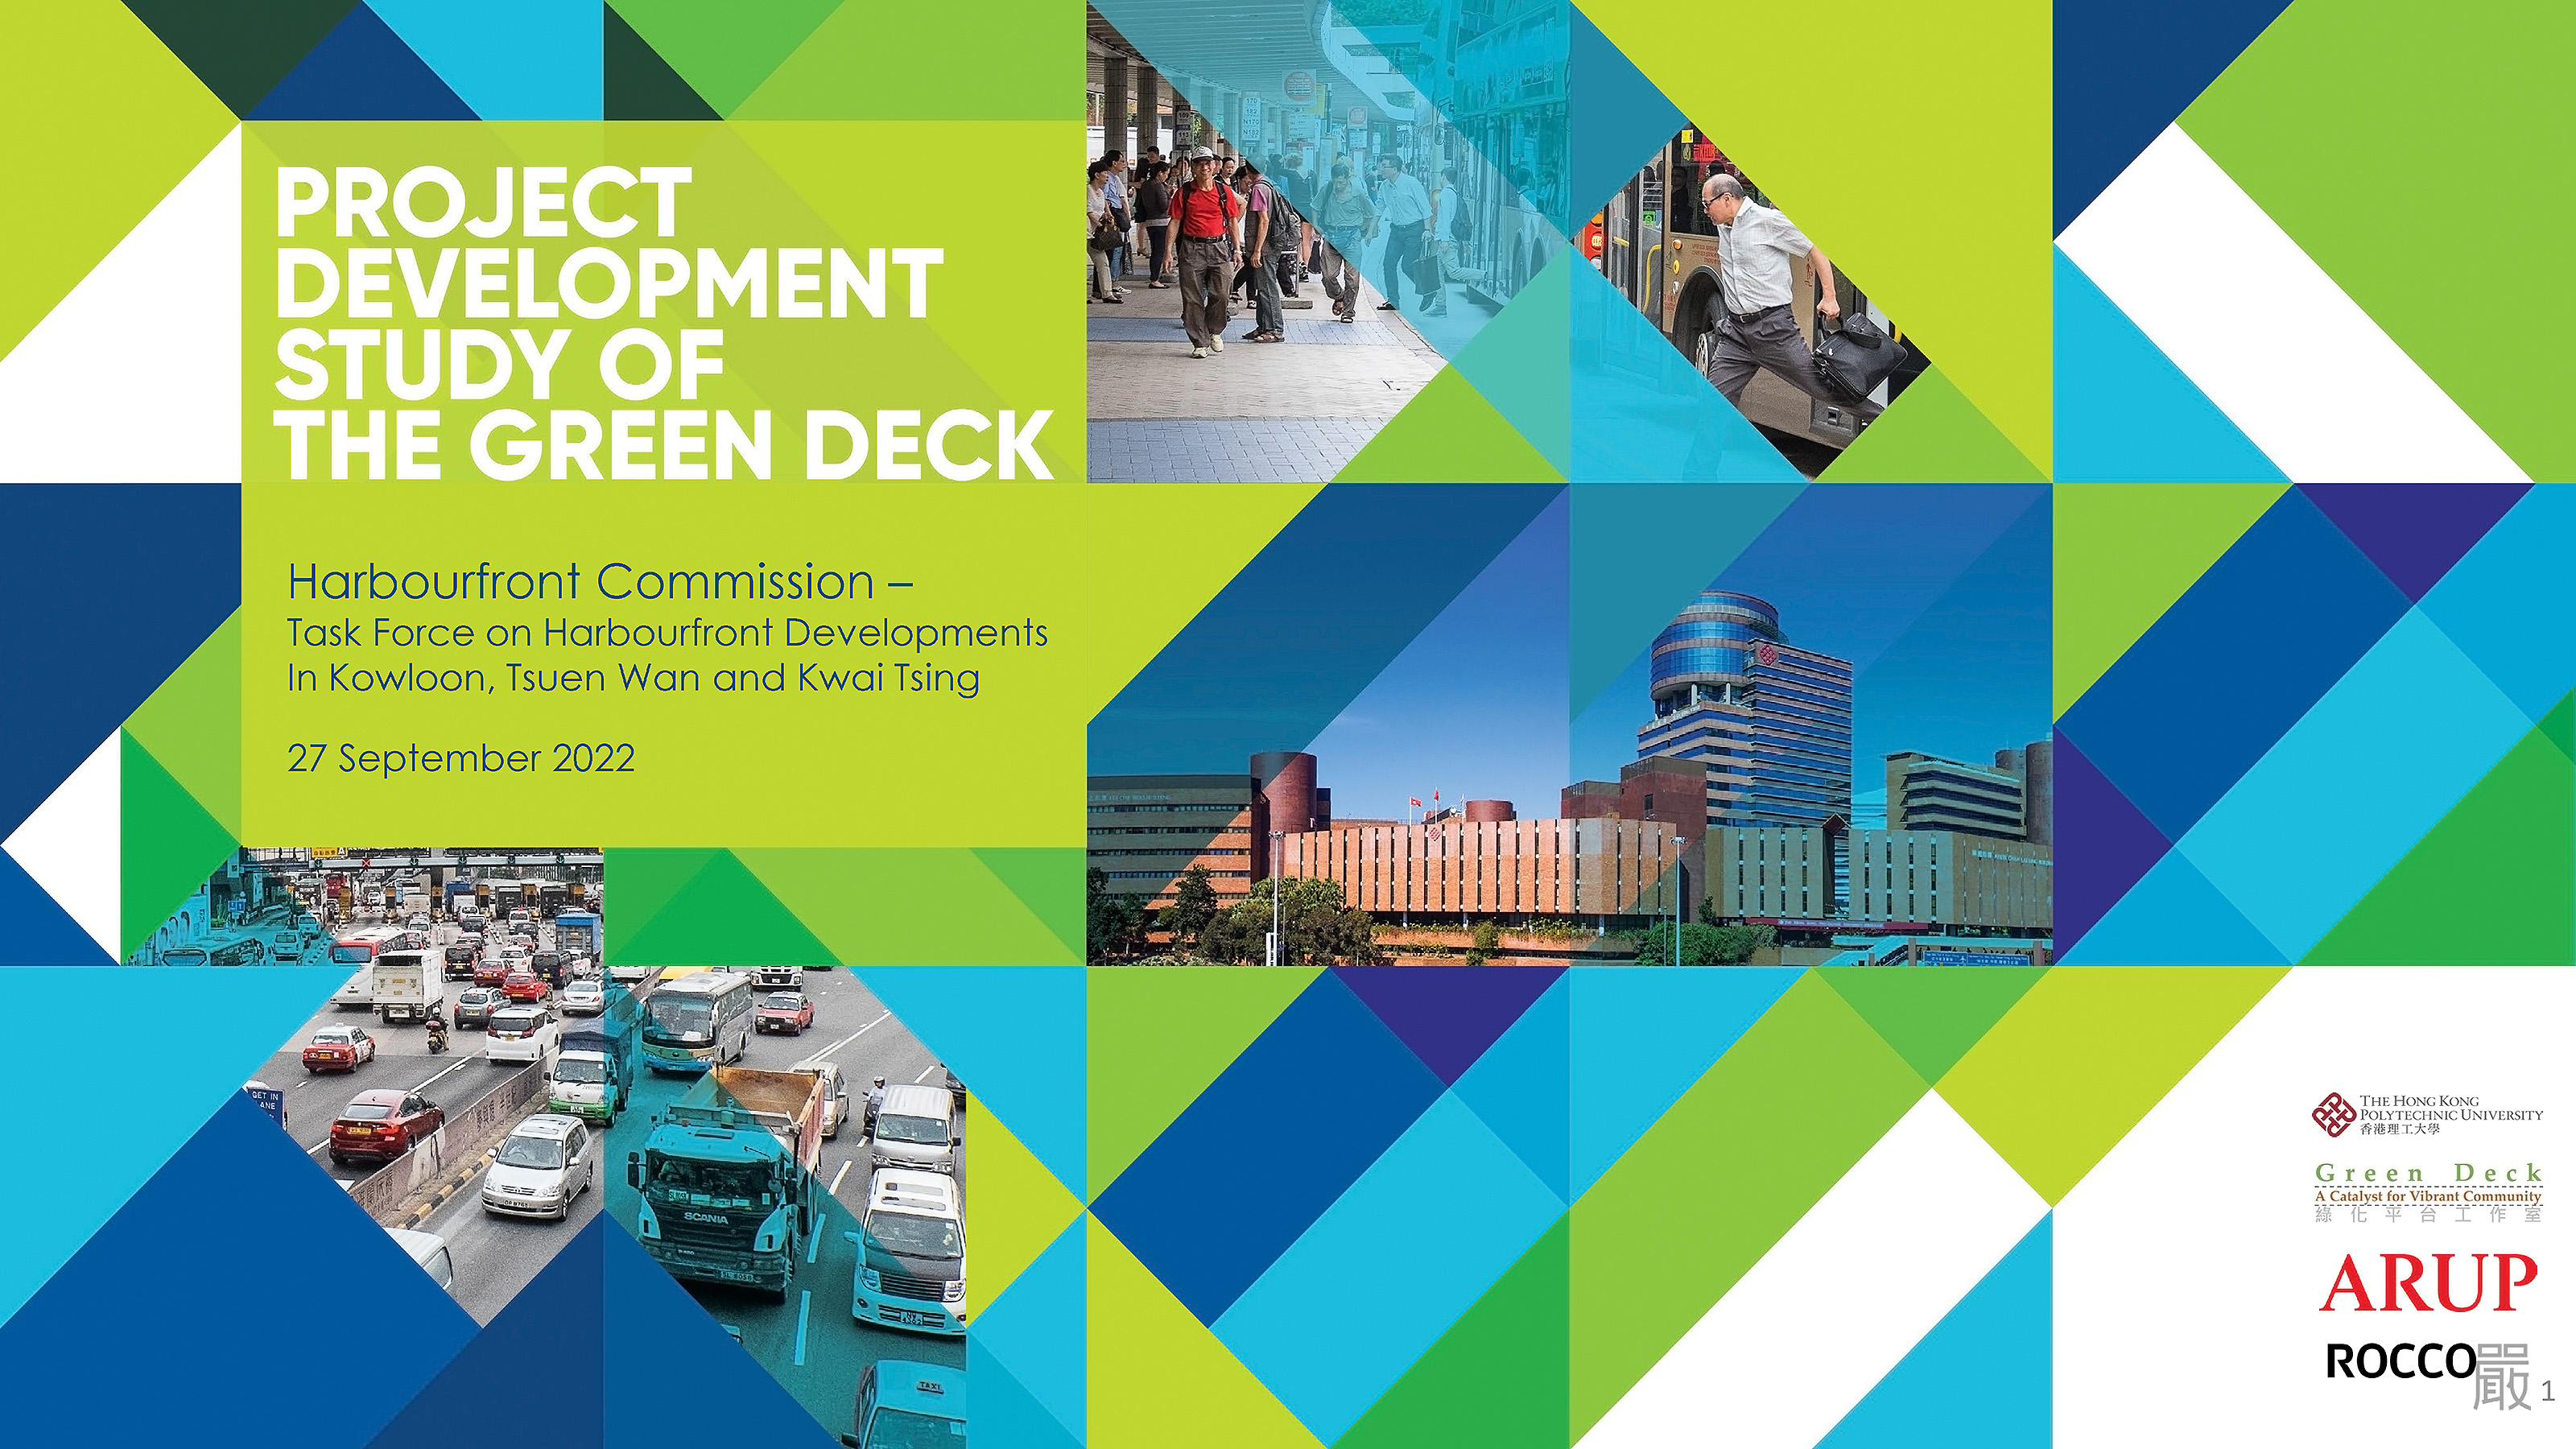 Project development study of the Green Deck : Harbourfront Commission -- Task Force on Harbourfront Developments in Kowloon, Tsuen Wan and Kwai Tsing